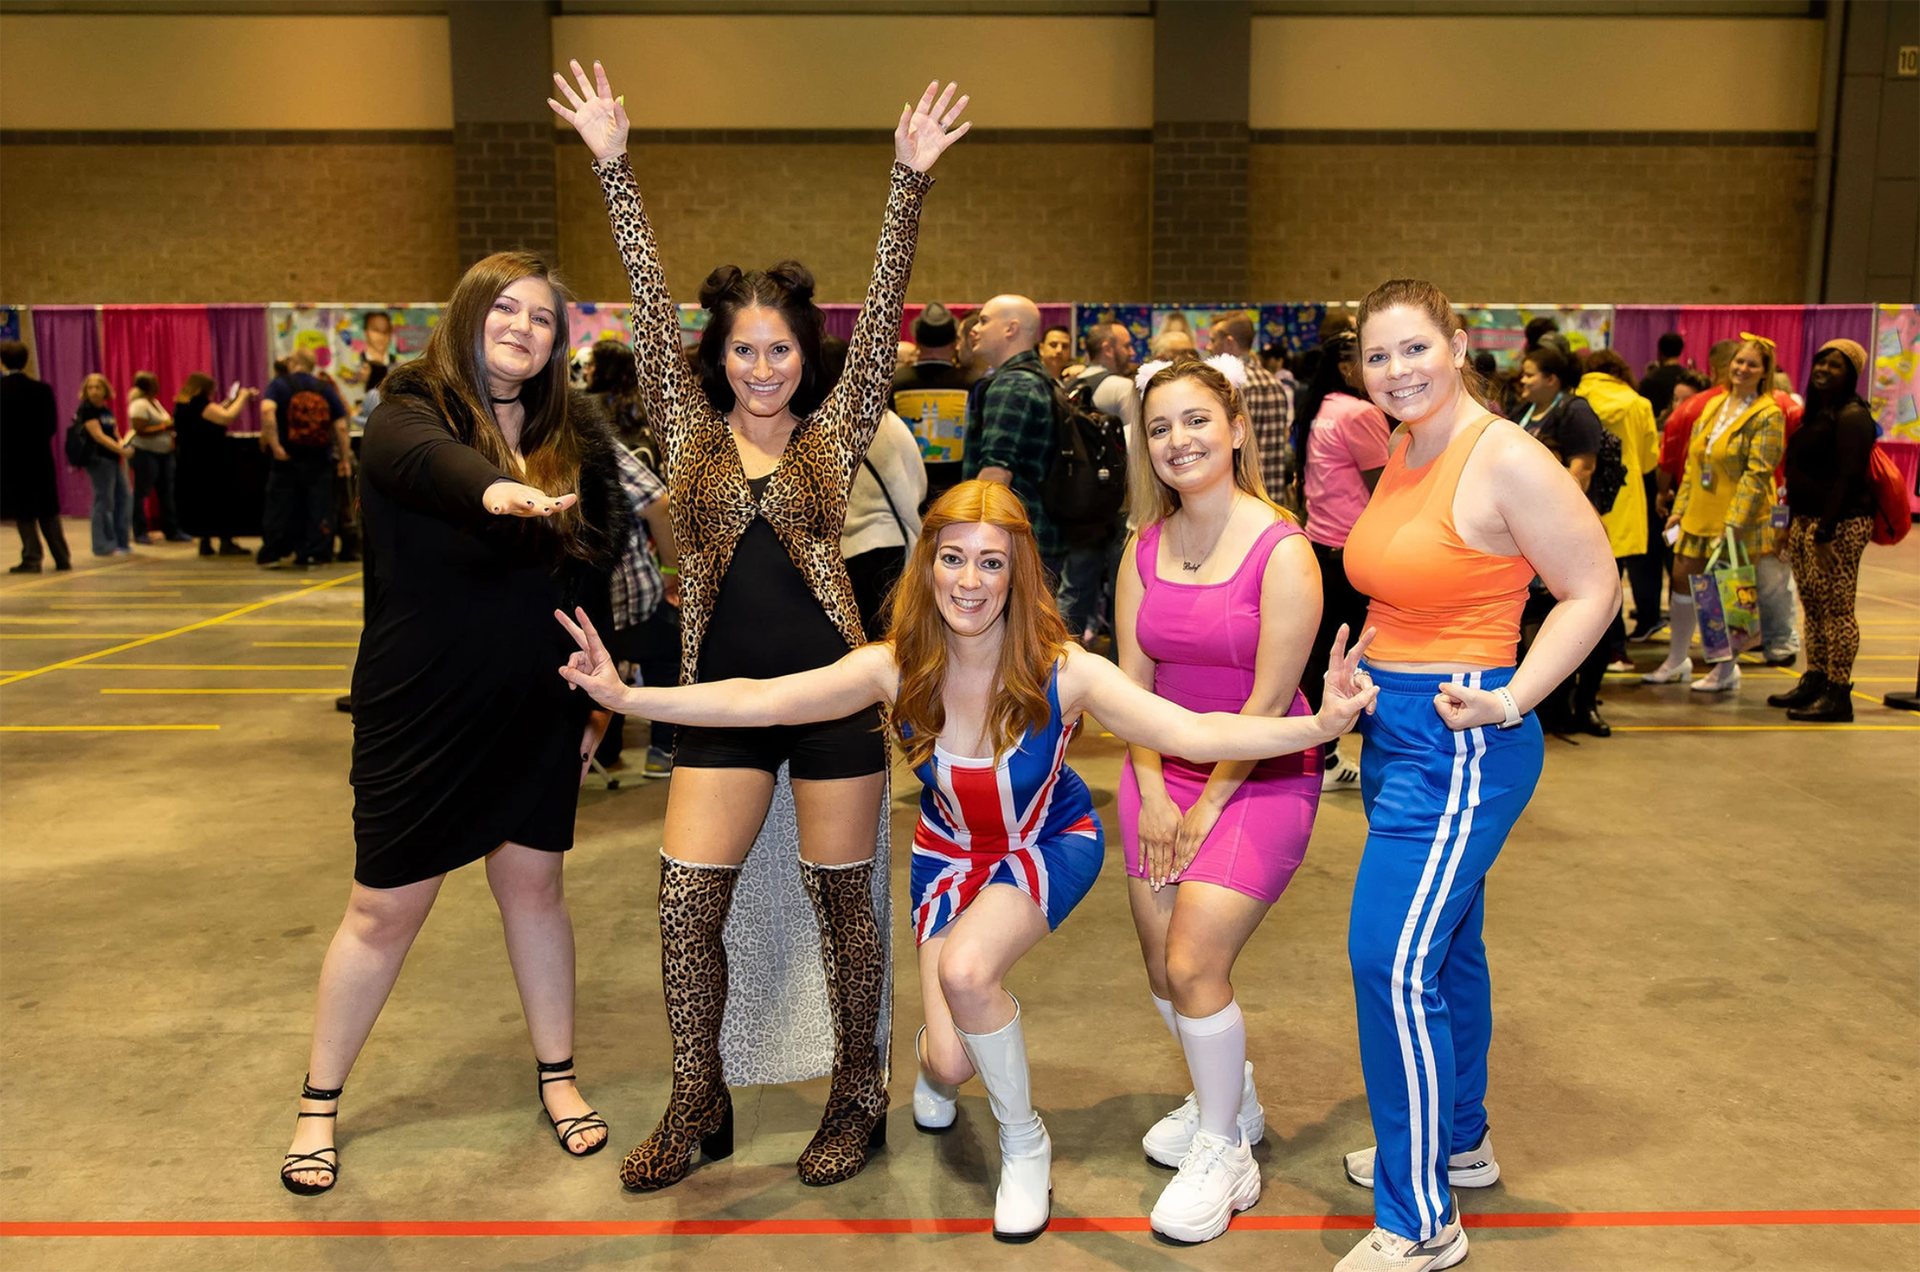 a group of women dressed in costume as the Spice Girls